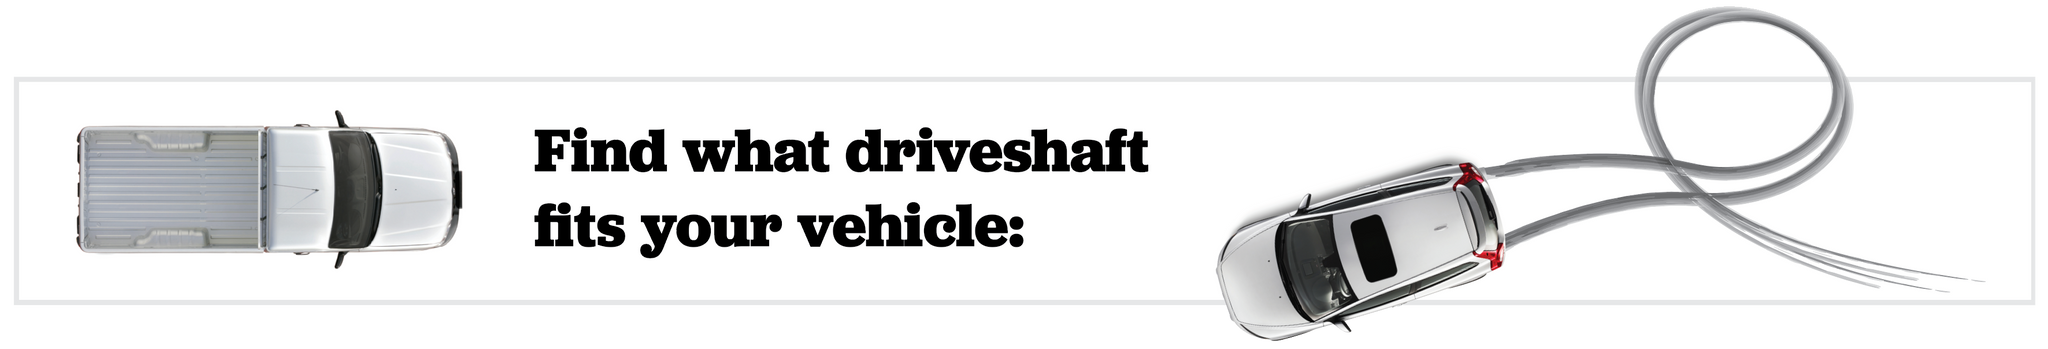 Find what driveshaft fits your vehicle: